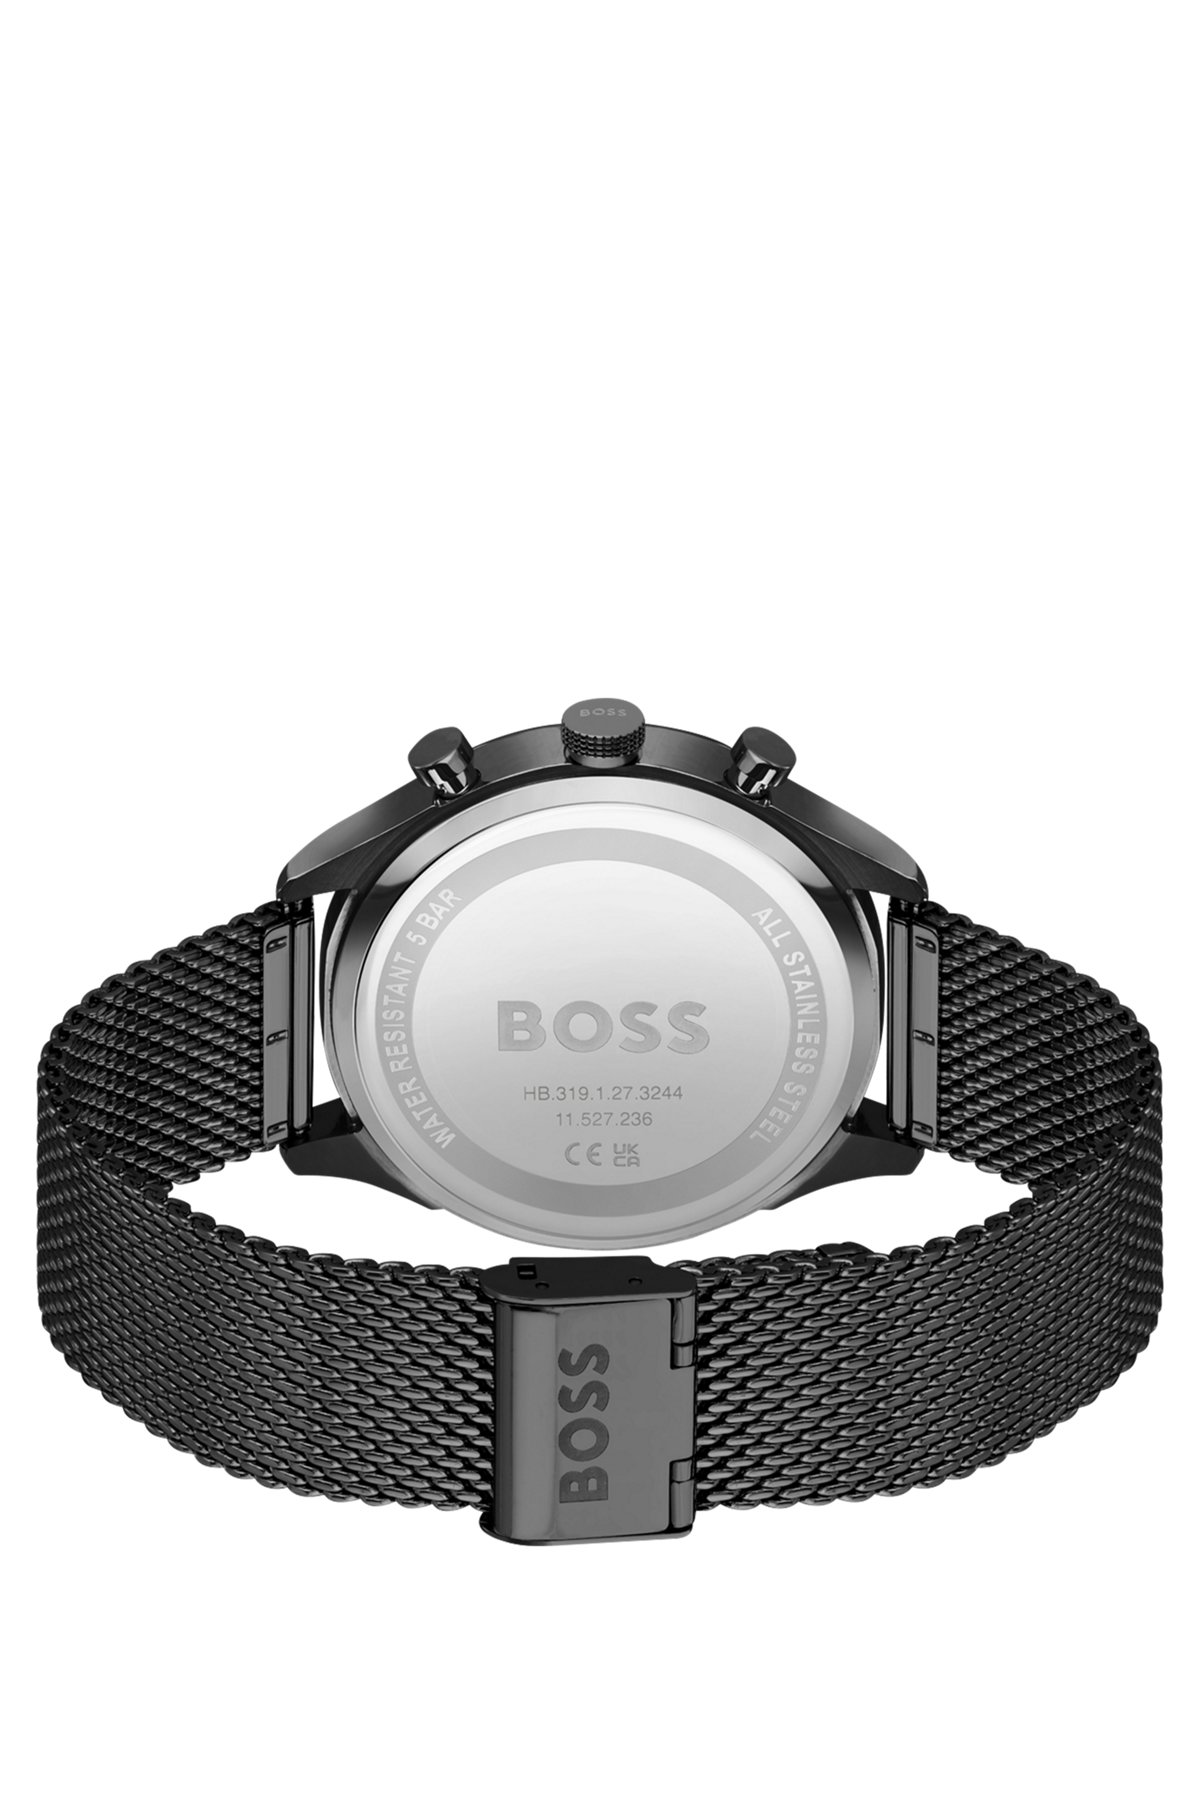 BOSS - Black-plated chronograph watch with mesh bracelet